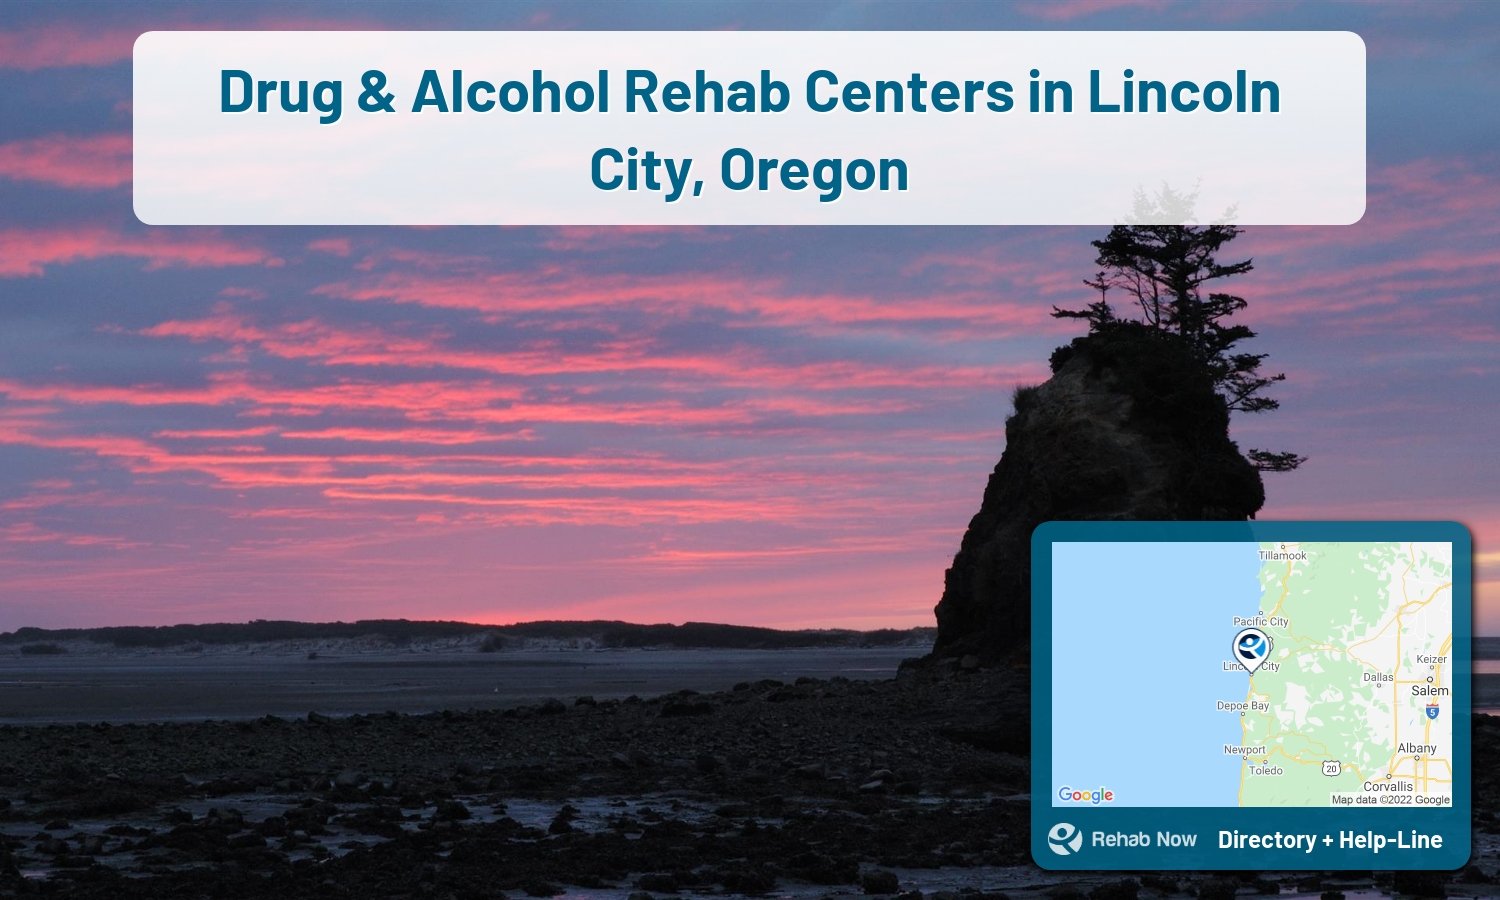 Our experts can help you find treatment now in Lincoln City, Oregon. We list drug rehab and alcohol centers in Oregon.